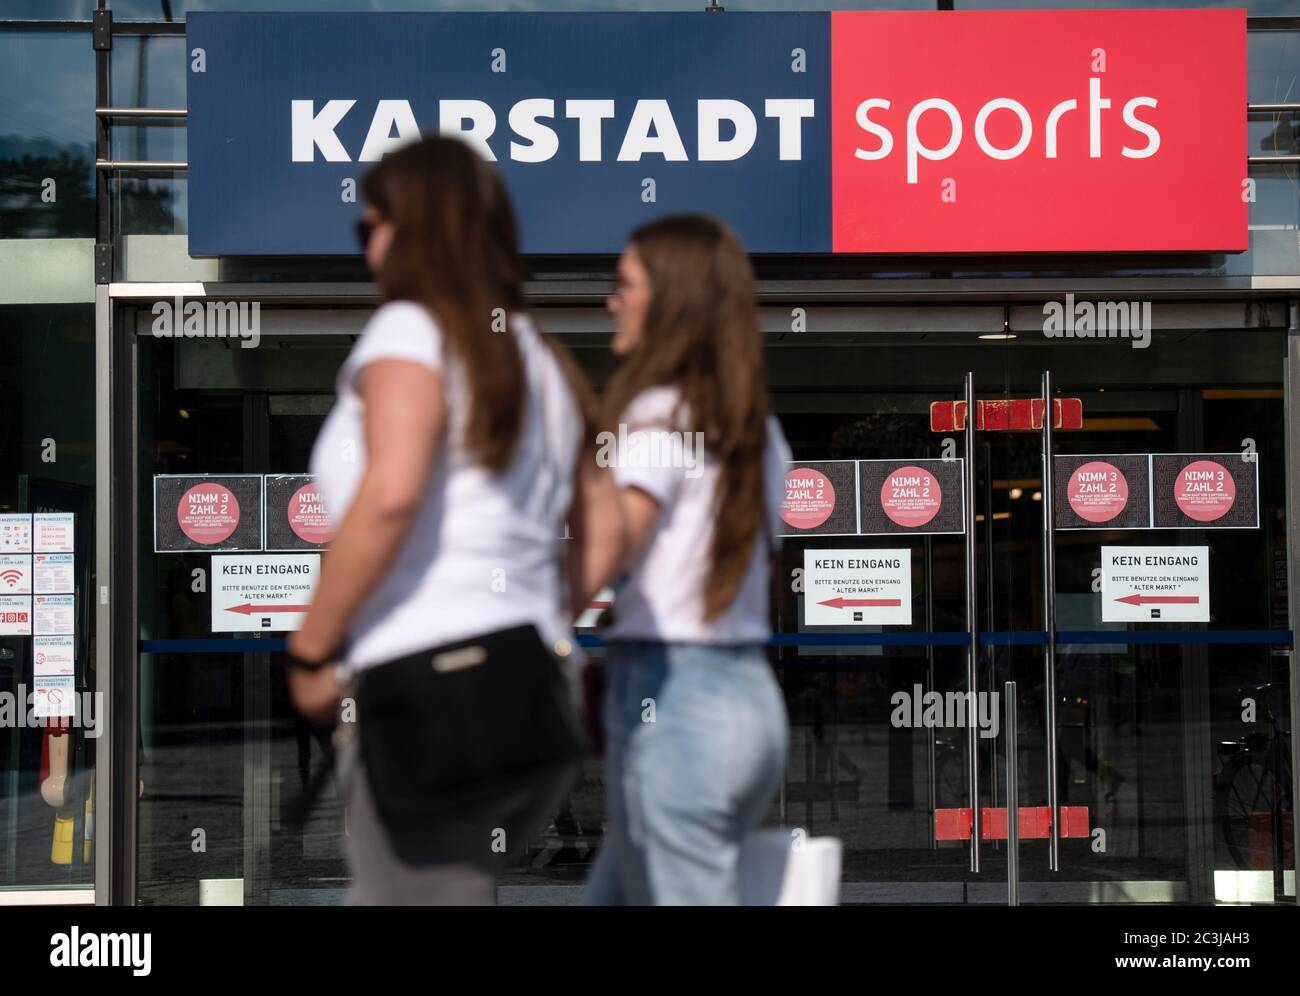 Dortmund, Germany. 20th June, 2020. Two passers-by walk past a Karstadt Sports branch. In addition to the planned closure of dozens of branches of the department store chain Galeria Karstadt Kaufhof, 20 of the 30 branches of the Karstadt Sports subsidiary are also to close. Credit: Bernd Thissen/dpa/Alamy Live News Stock Photo